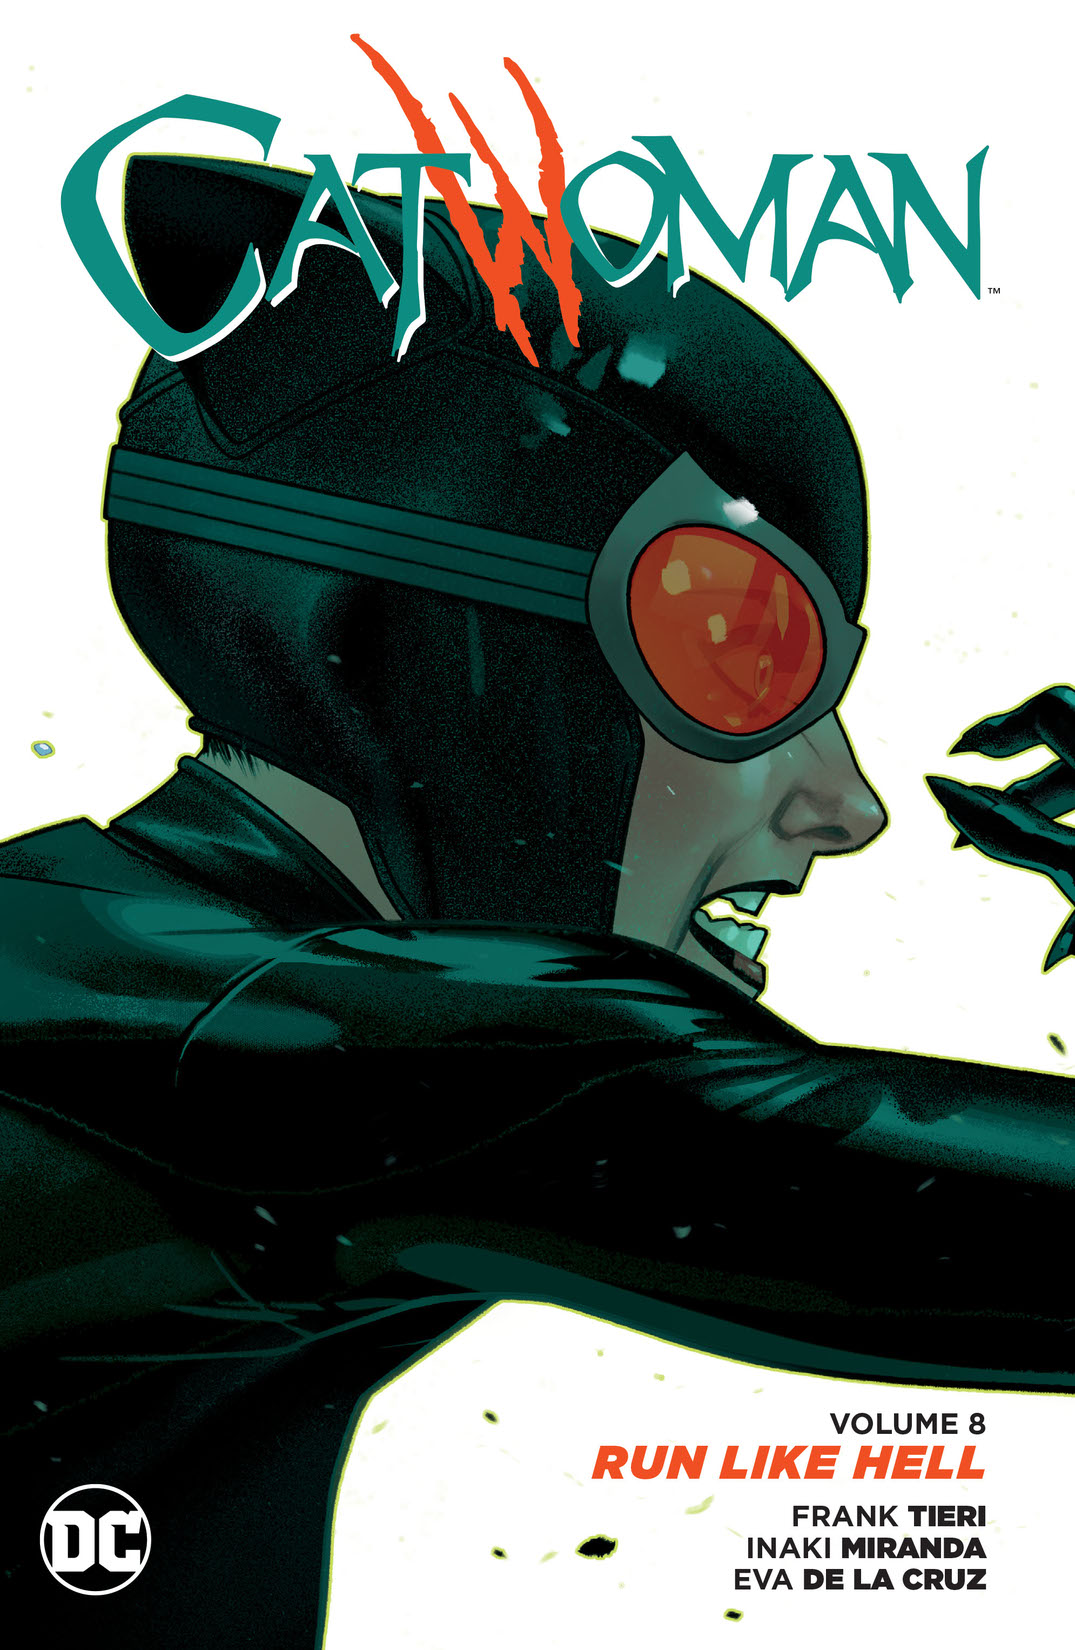 Catwoman Vol. 8: Run Like Hell preview images